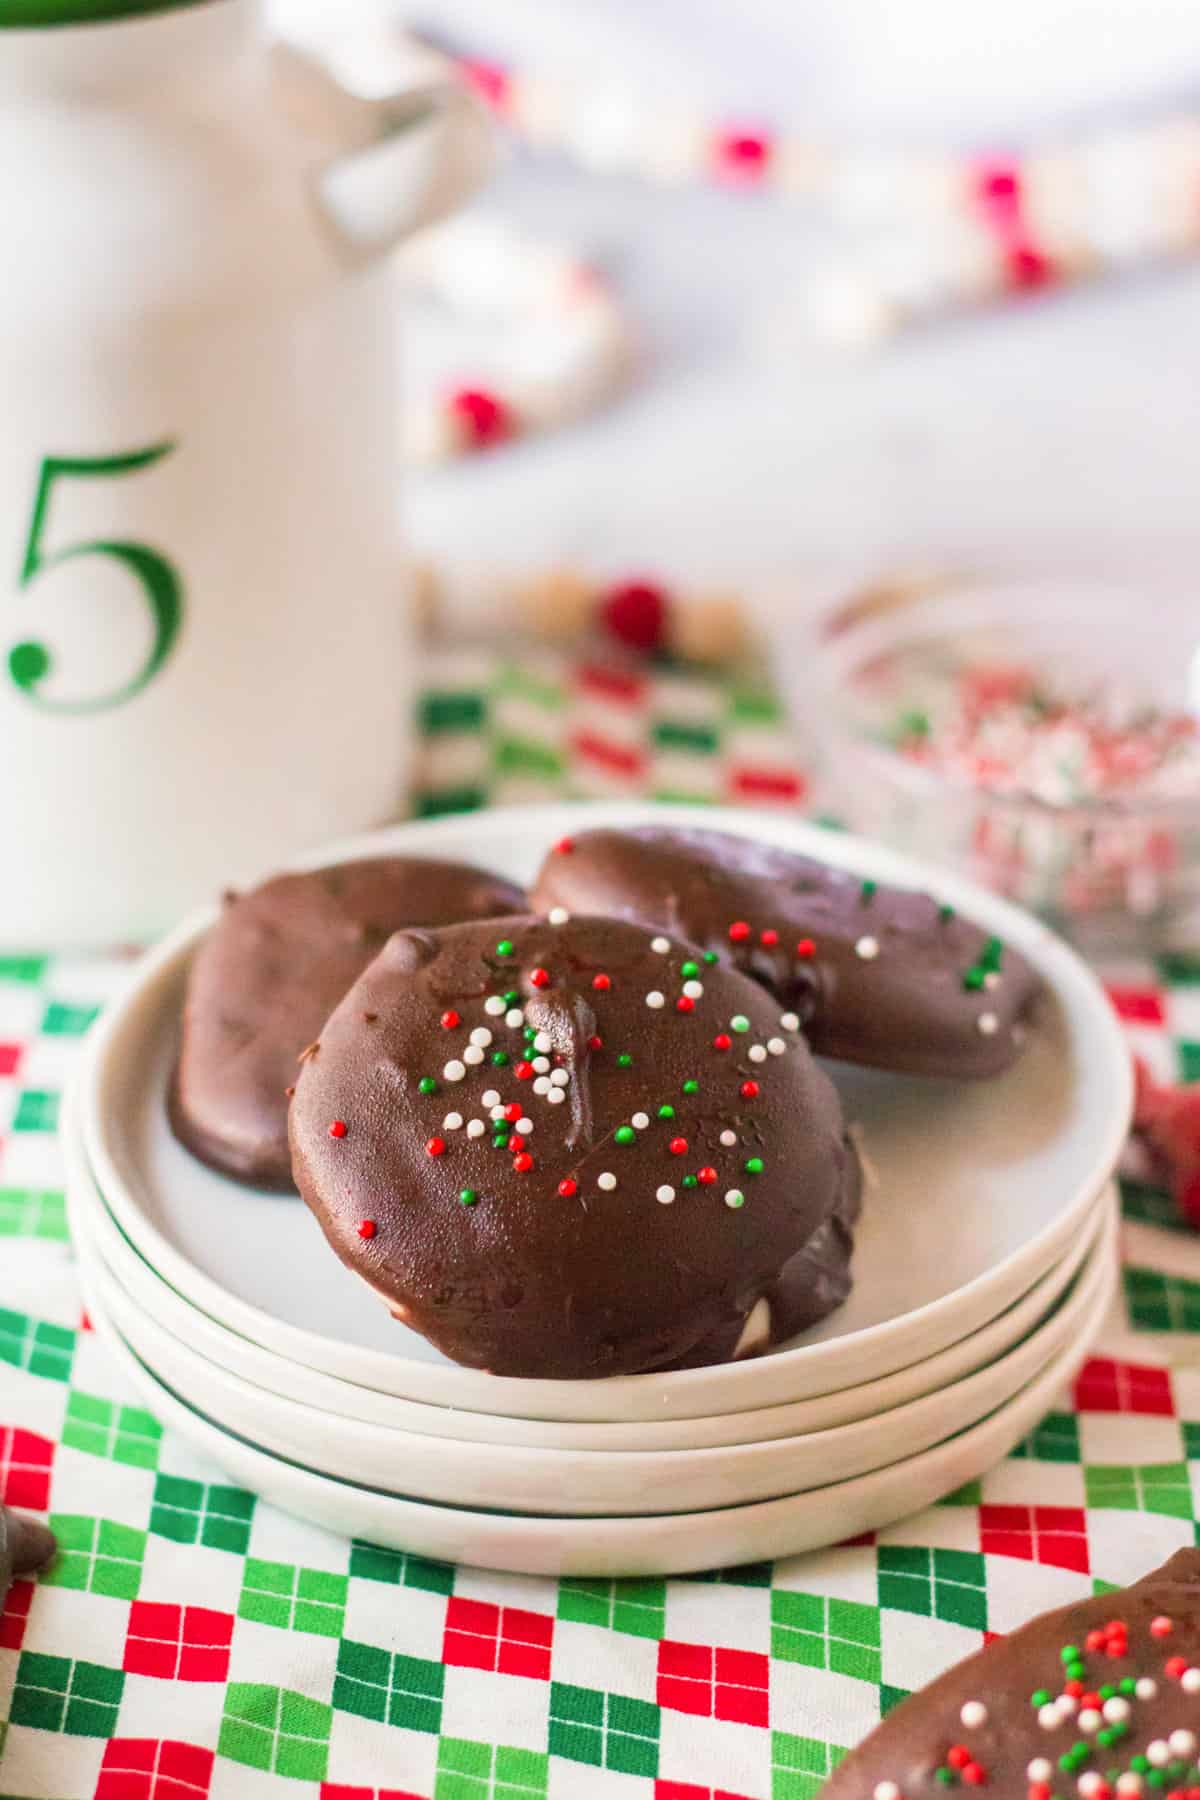 Homemade peppermint patties with red, green, and white sprinkles.